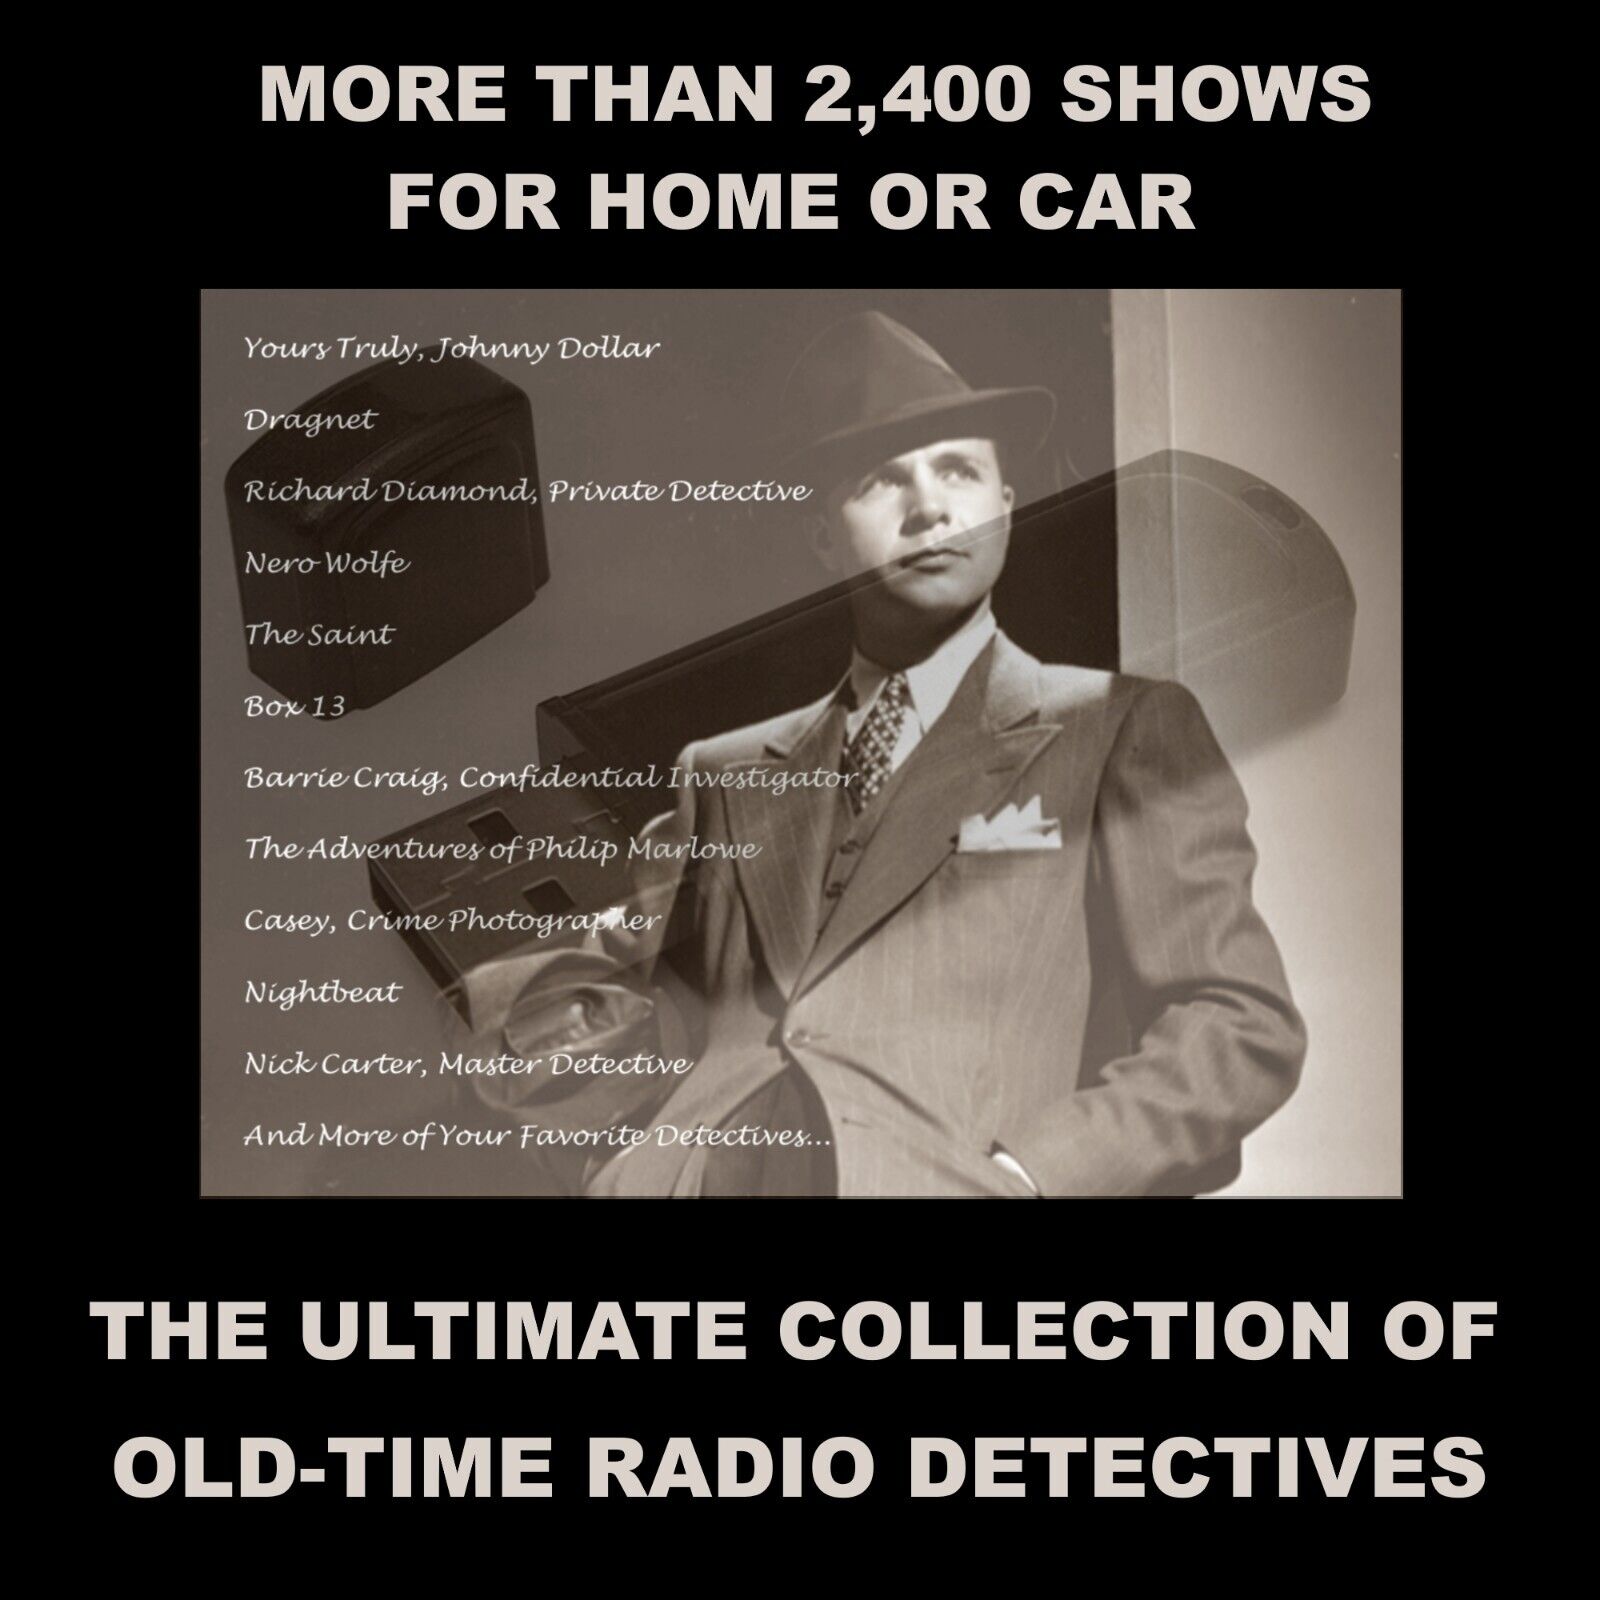 ULTIMATE COLLECTION OF OLD-TIME RADIO DETECTIVES. 2,475 SHOWS ON USB FLASH DRIVE